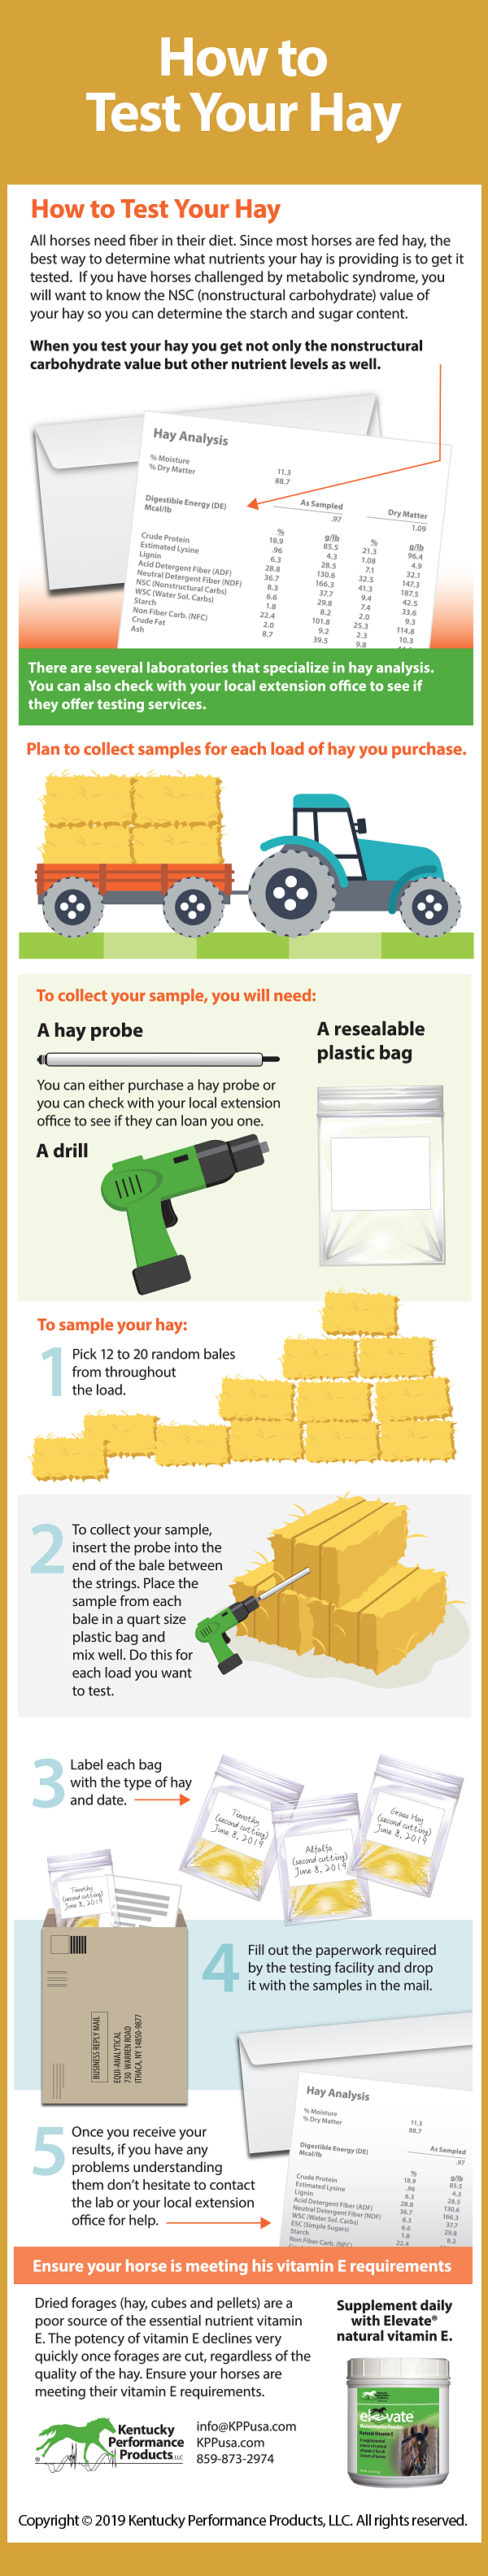 How to test hay infographic